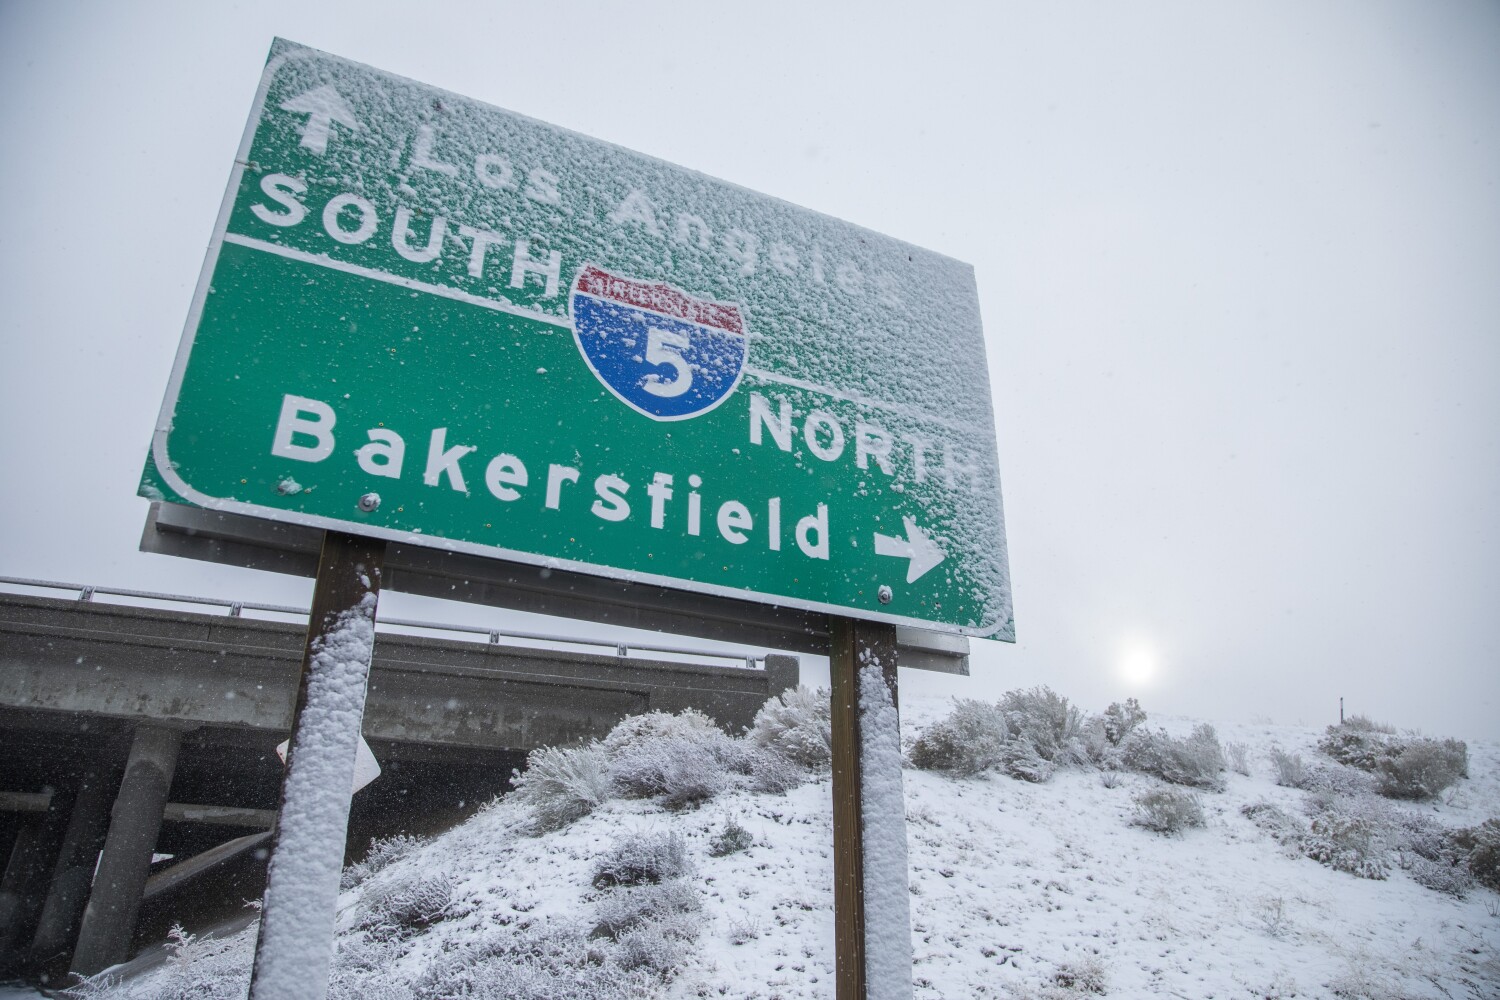 Winter storms to sweep across California, bringing snow and rain to holiday travel